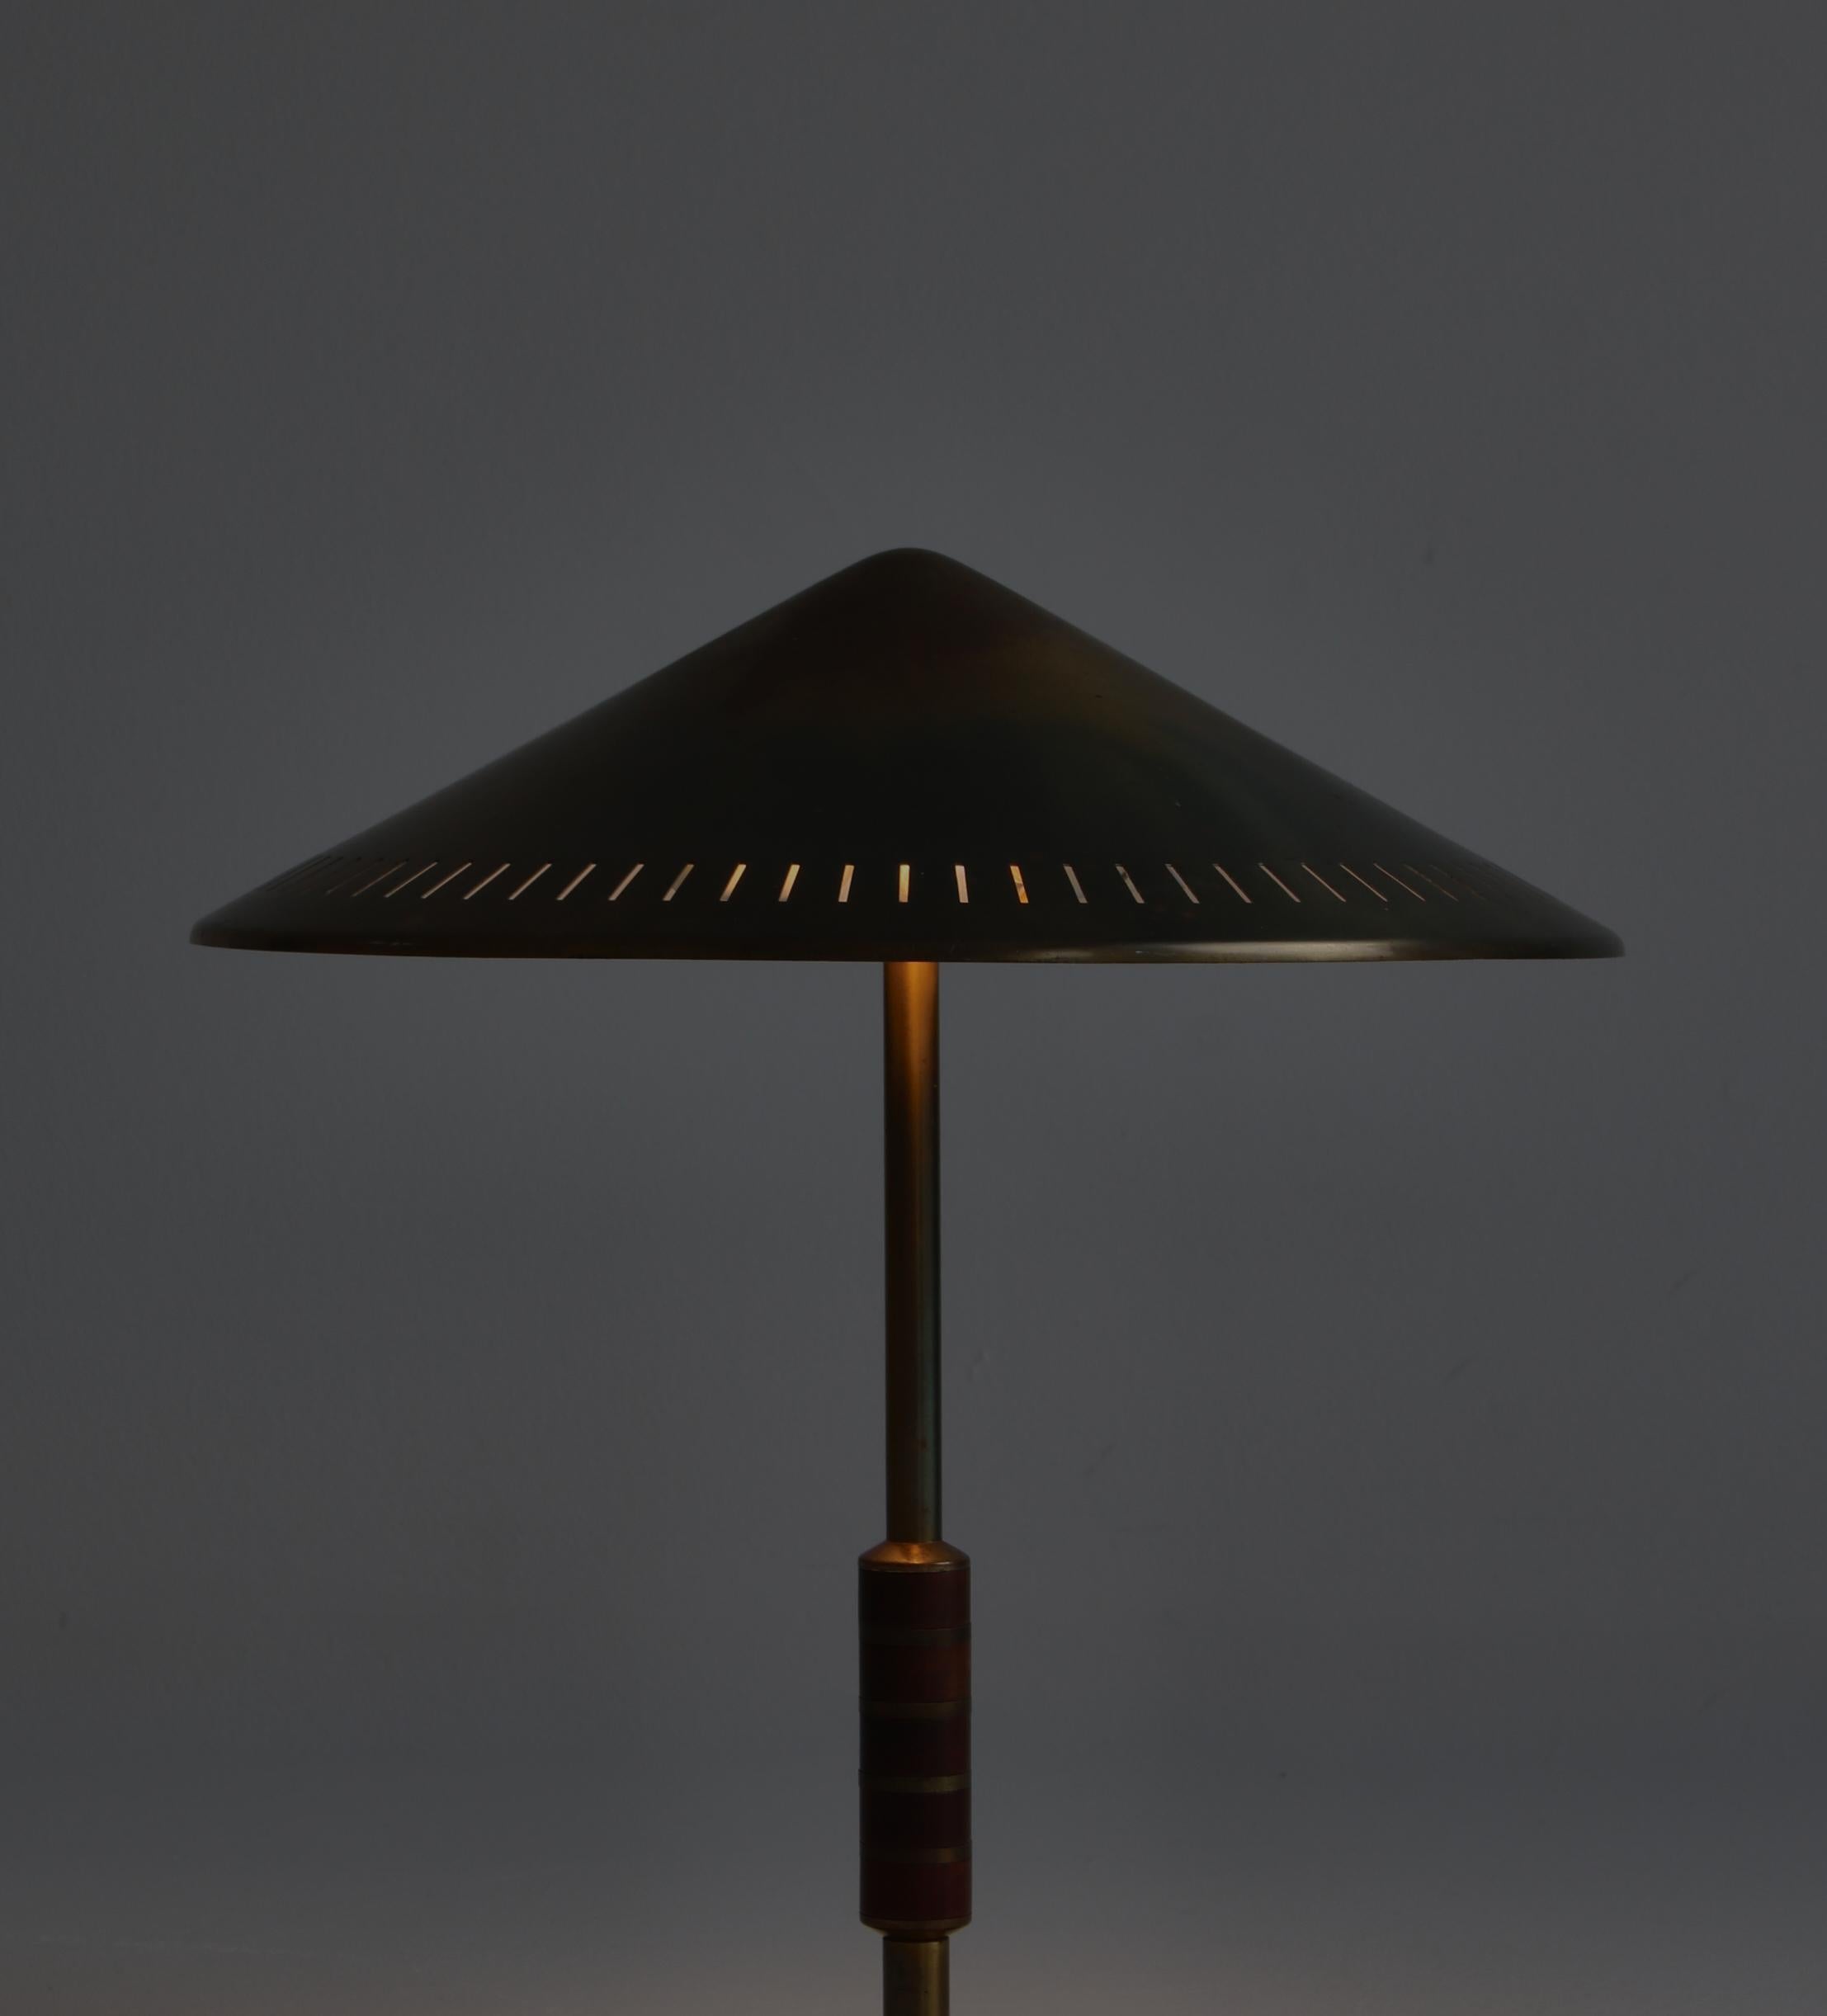 Danish Modern Brass & Mahogany Table Lamp by Bent Karlby for LYFA, 1956 In Good Condition For Sale In Odense, DK